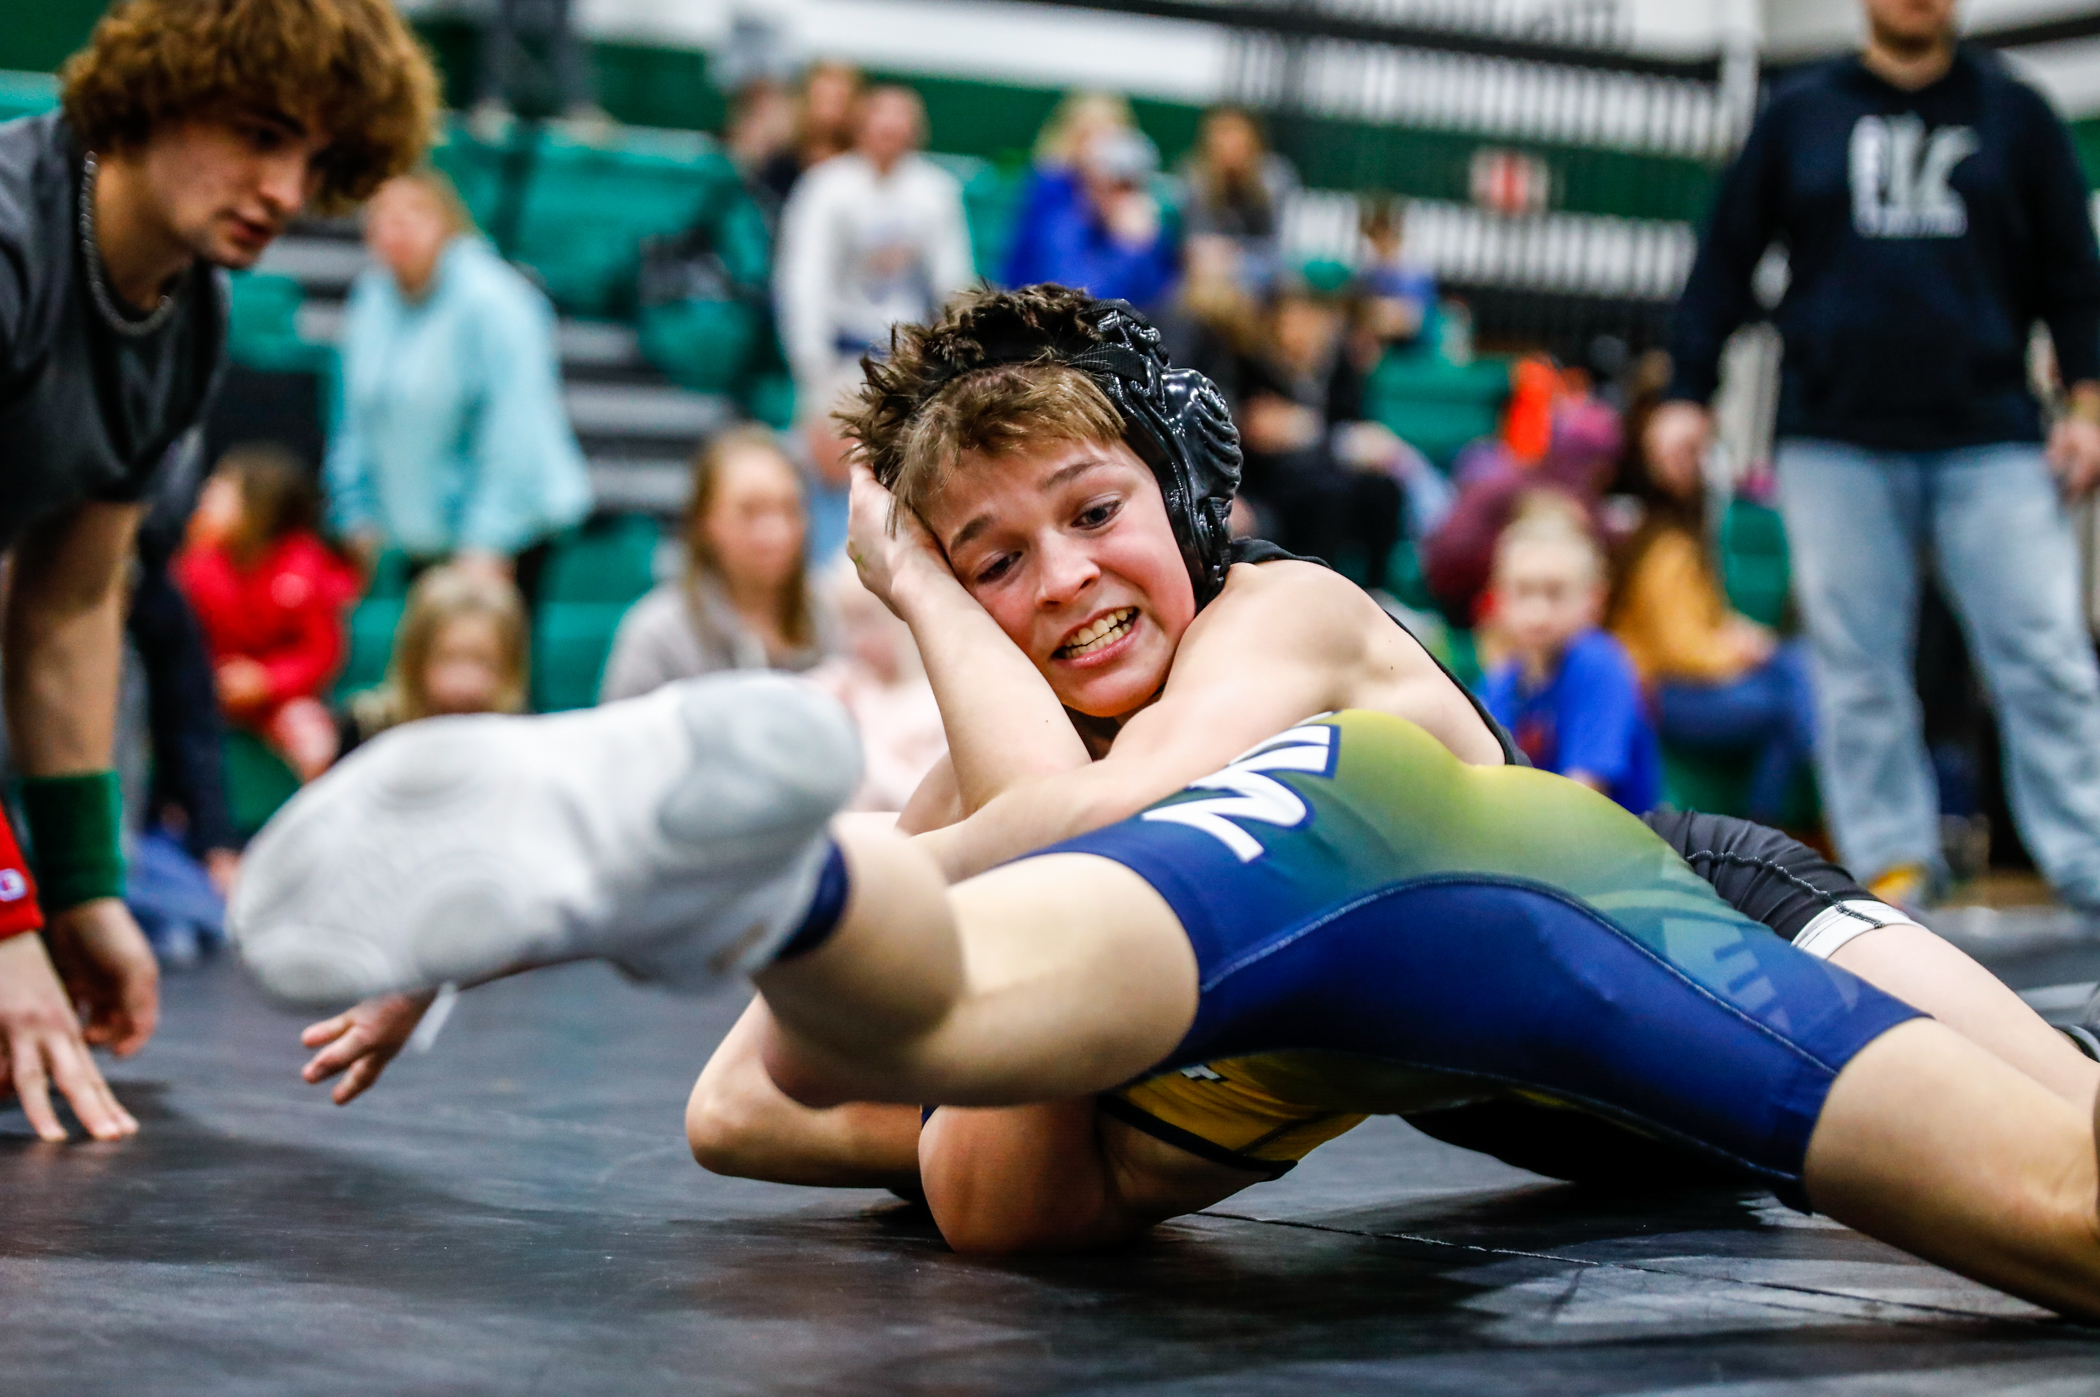 Youth wrestlers learn skills, enjoy competition Maple Lake Messenger